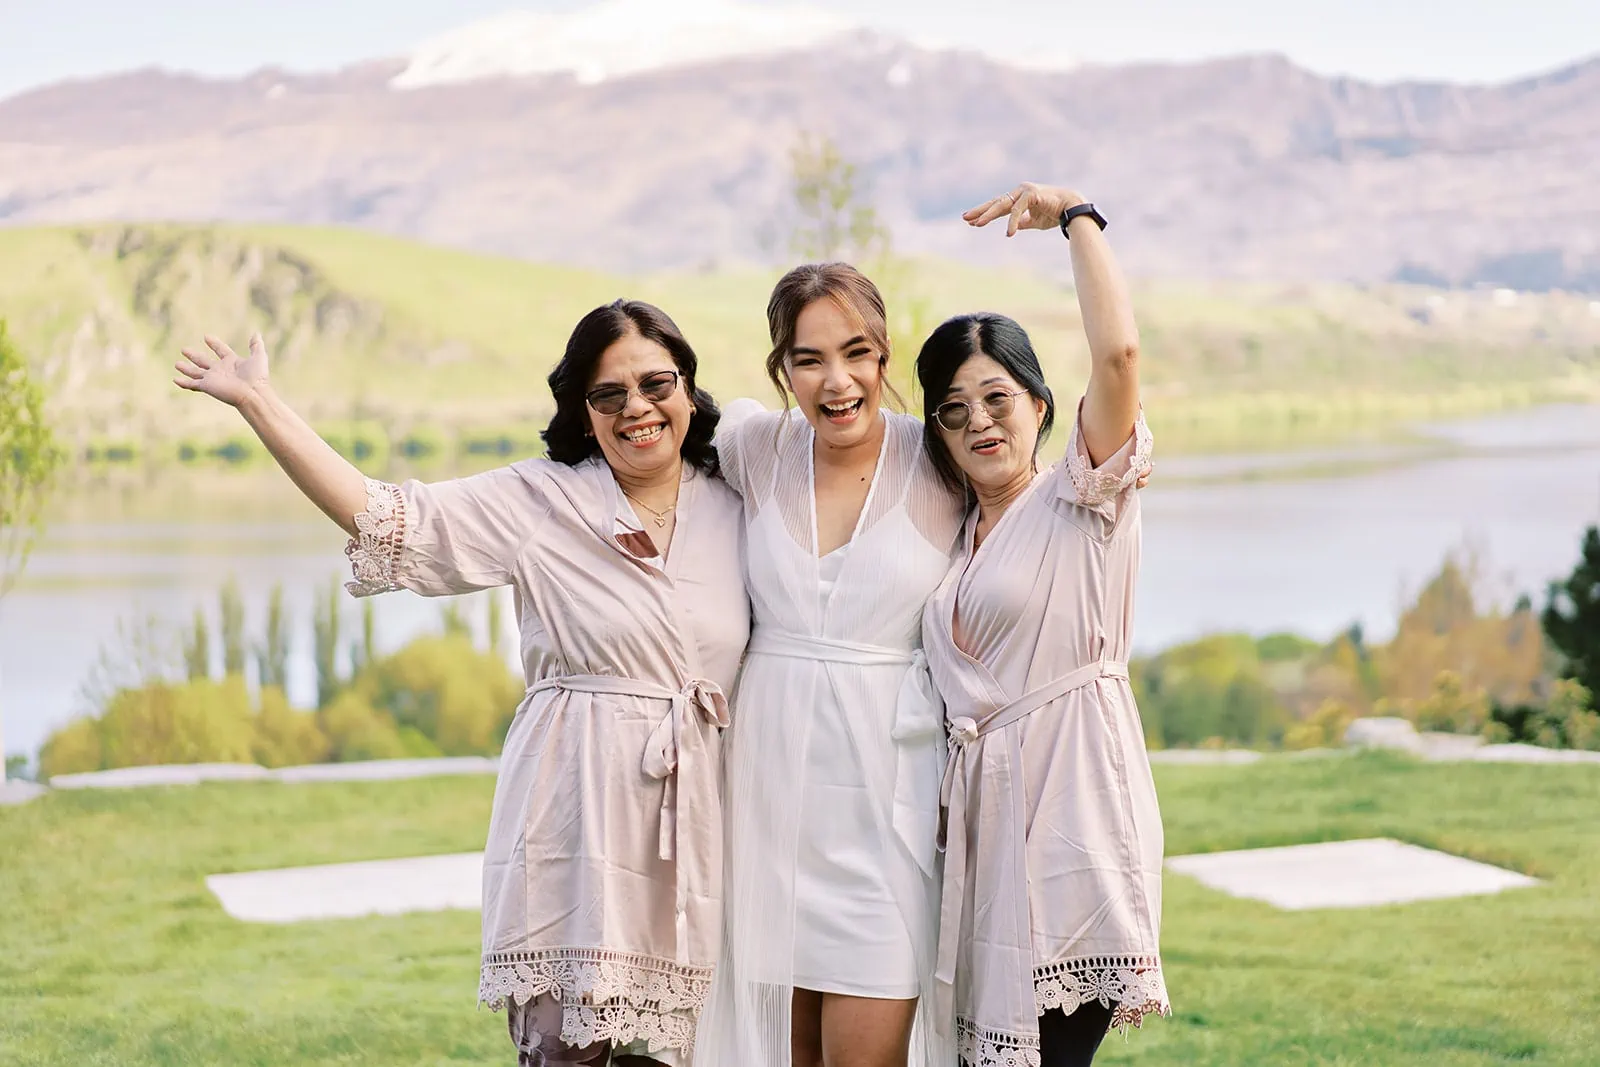 Queenstown Elopement Heli Wedding Photographer クイーンズタウン結婚式 | Tobi, Ceidi, and Three bridesmaids posing for a Queenstown Wedding photo in front of a lake.